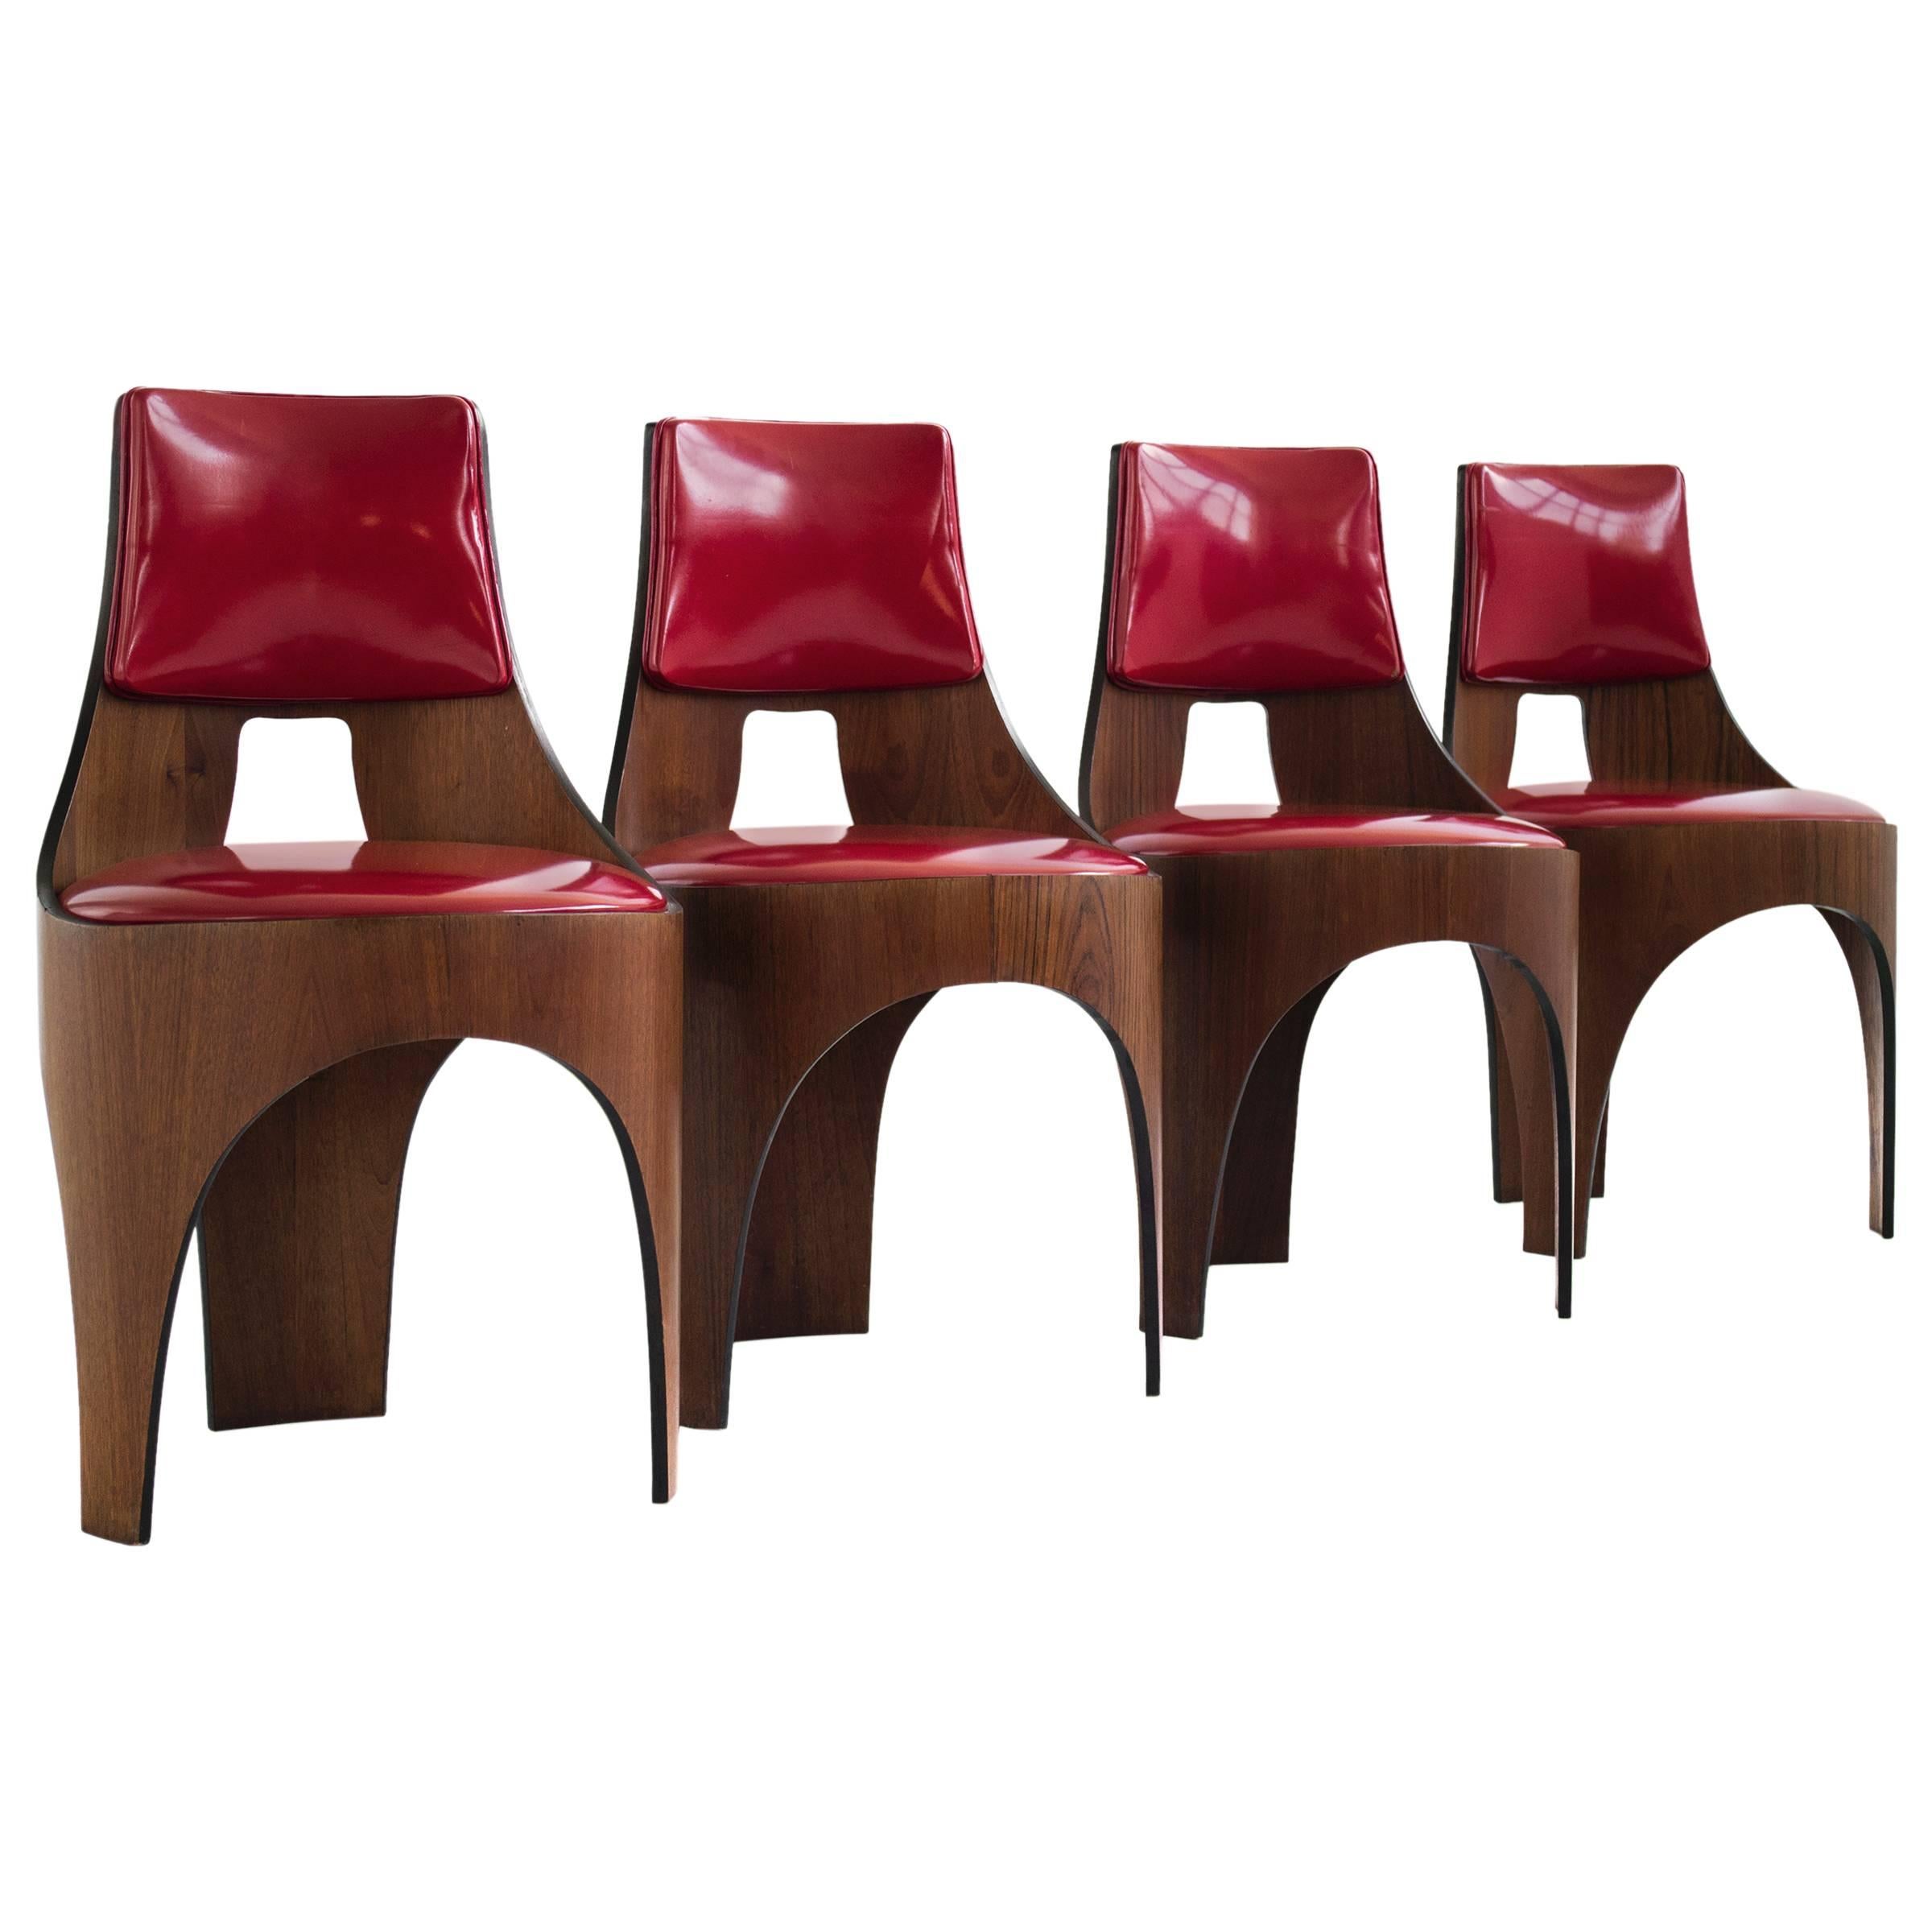 Henry Glass Set of Four Dining Chairs